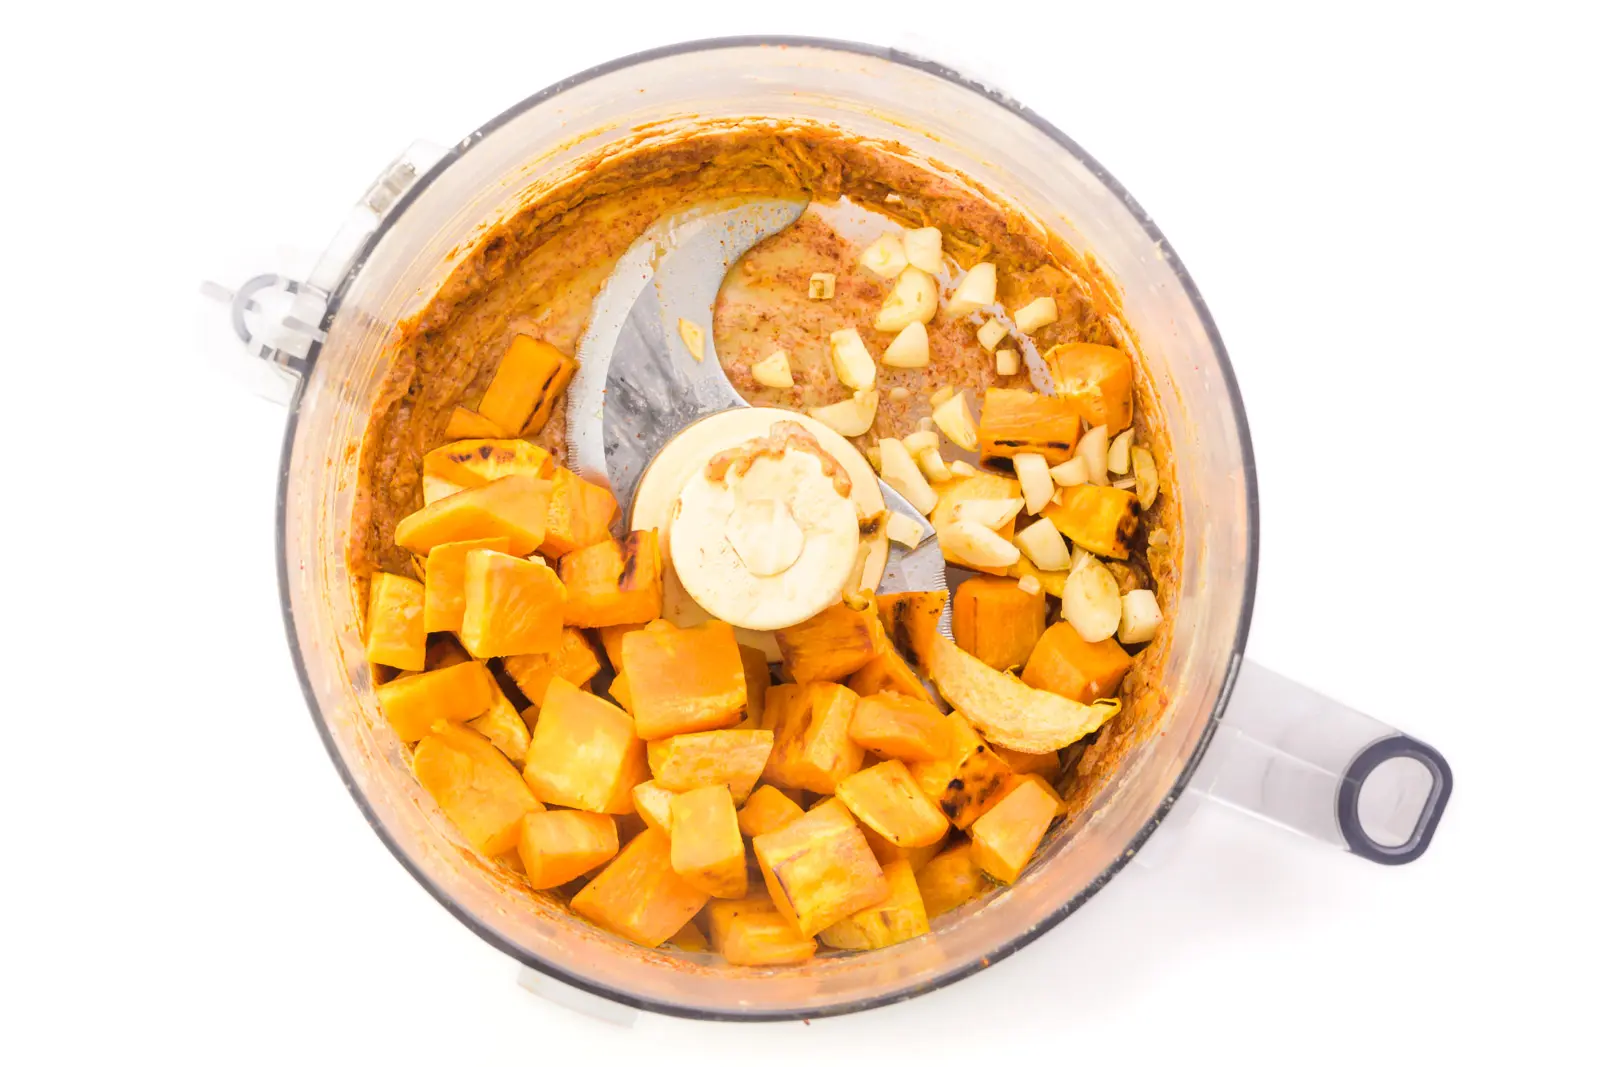 Ingredients are in a food processor, such as sweet potatoes, garlic, and other ground up ingredients.